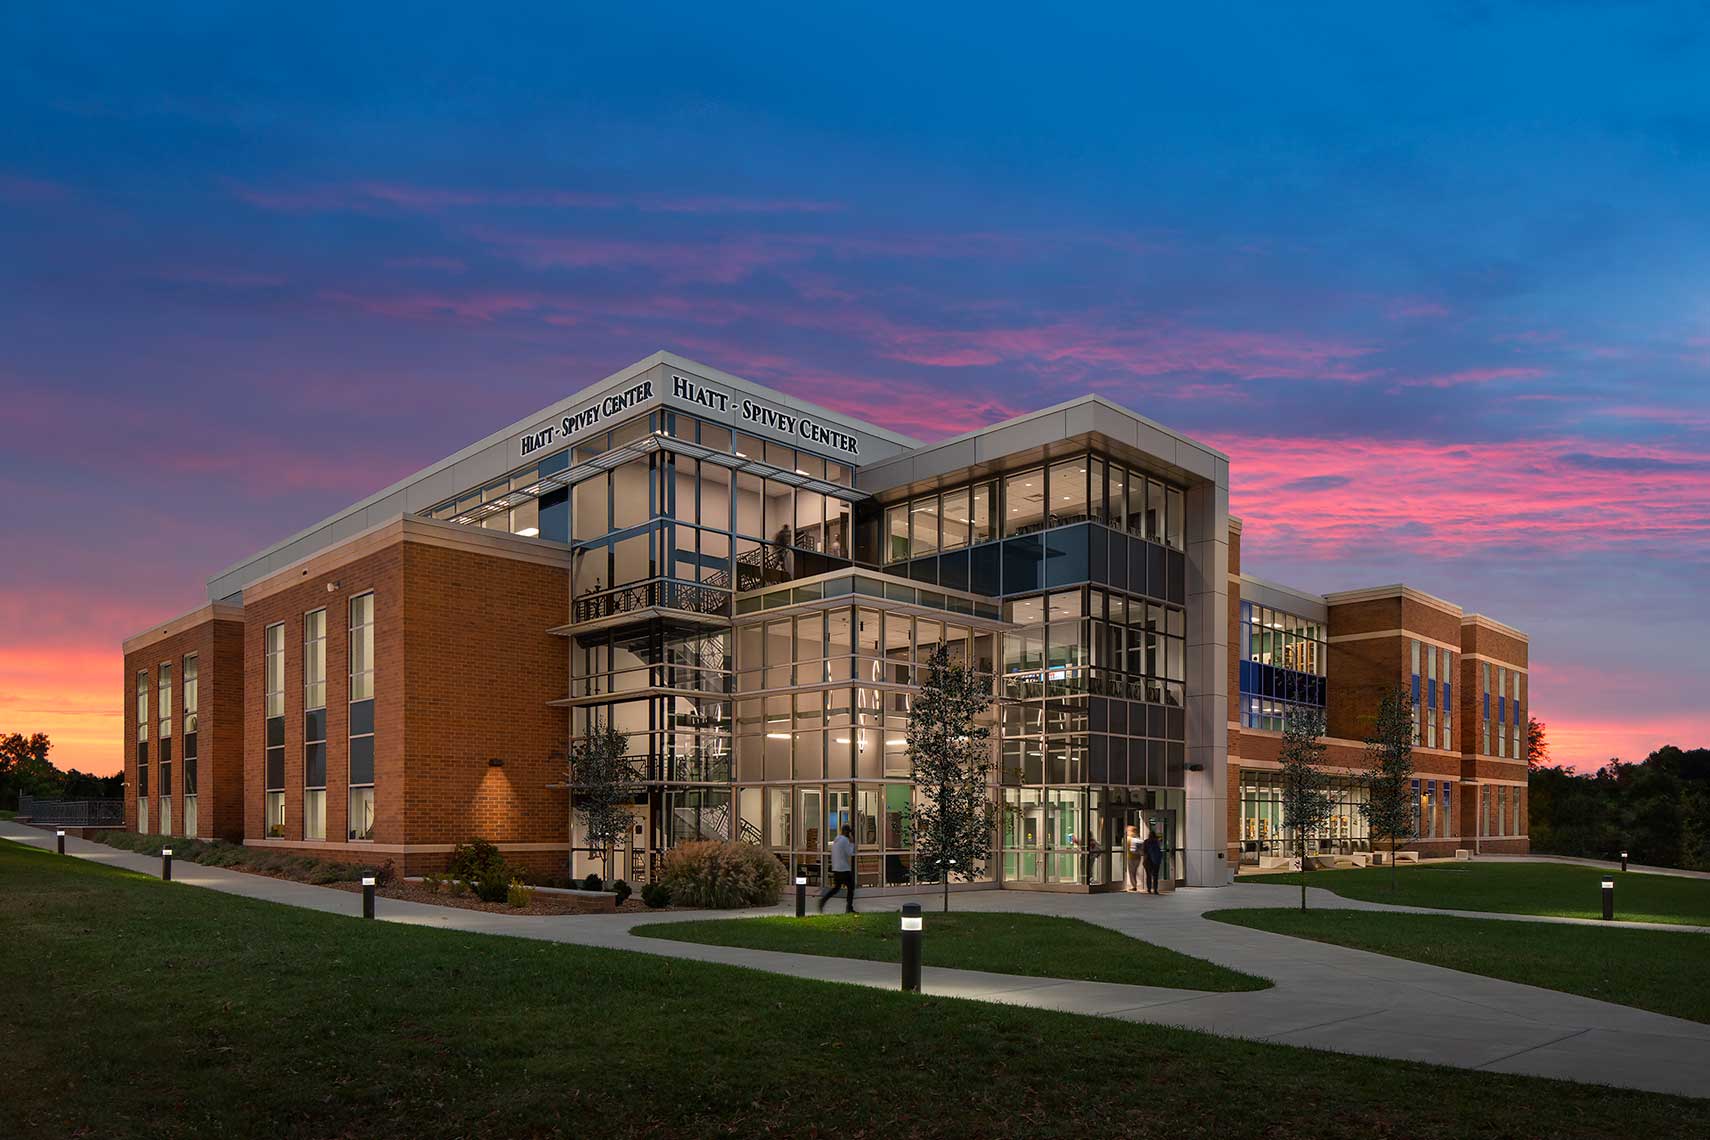 Motlow State Community College - Smyrna Campus<br>TMPartners